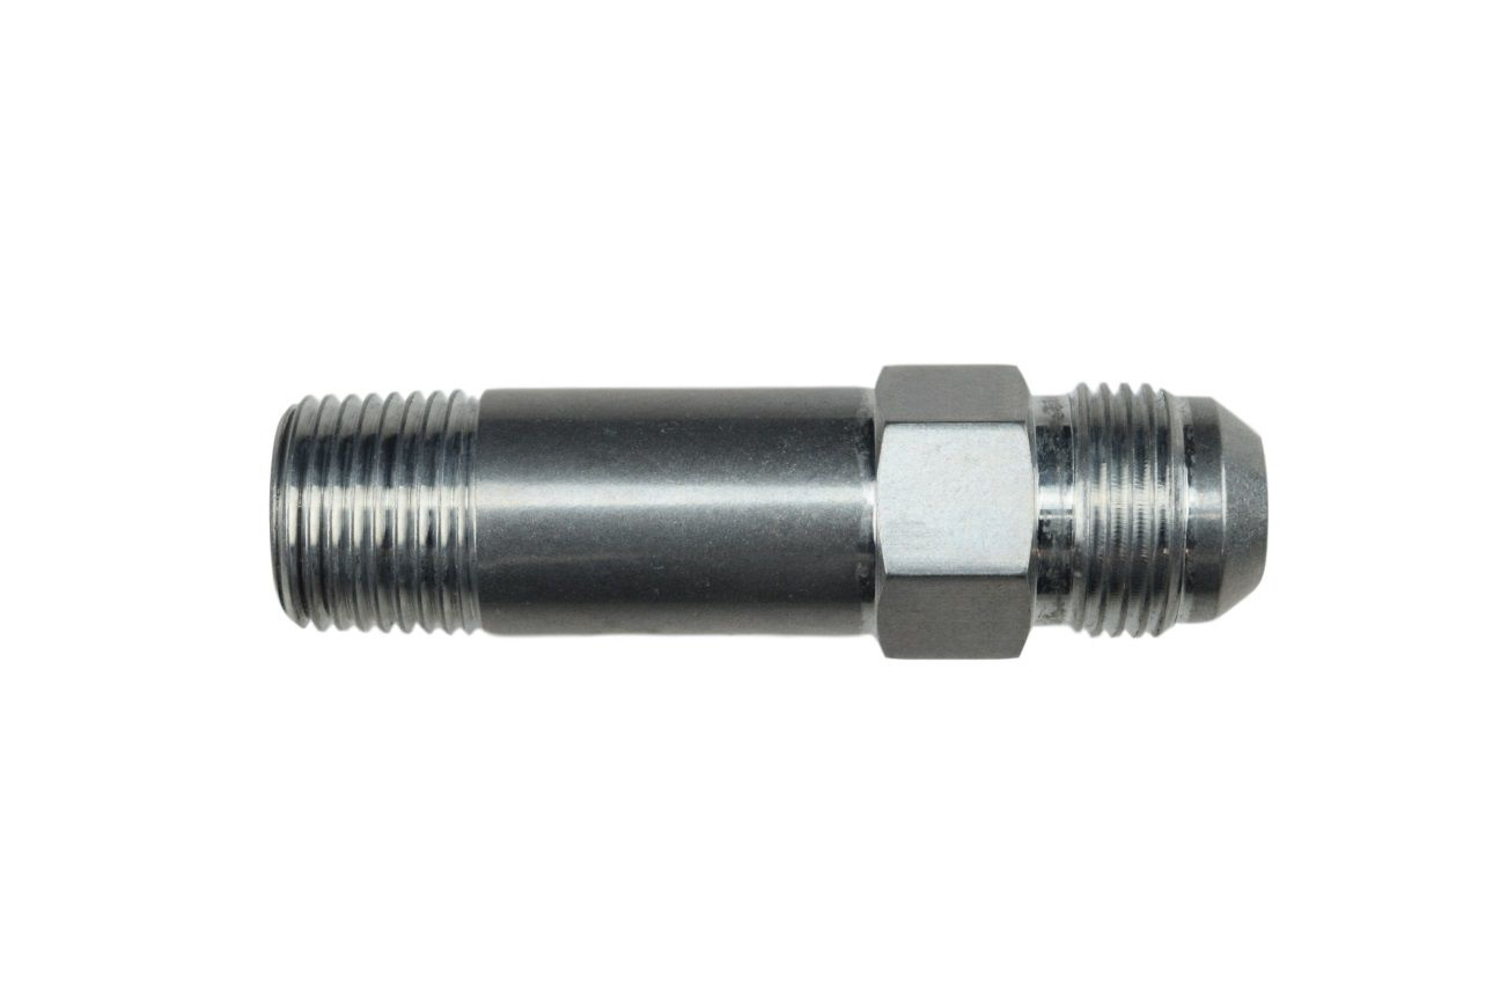 ICT Billet AN816-10-08XL - Fitting, Adapter, Straight, 10 AN Male to 1/2 in NPT Male, Aluminum, Natural, Each